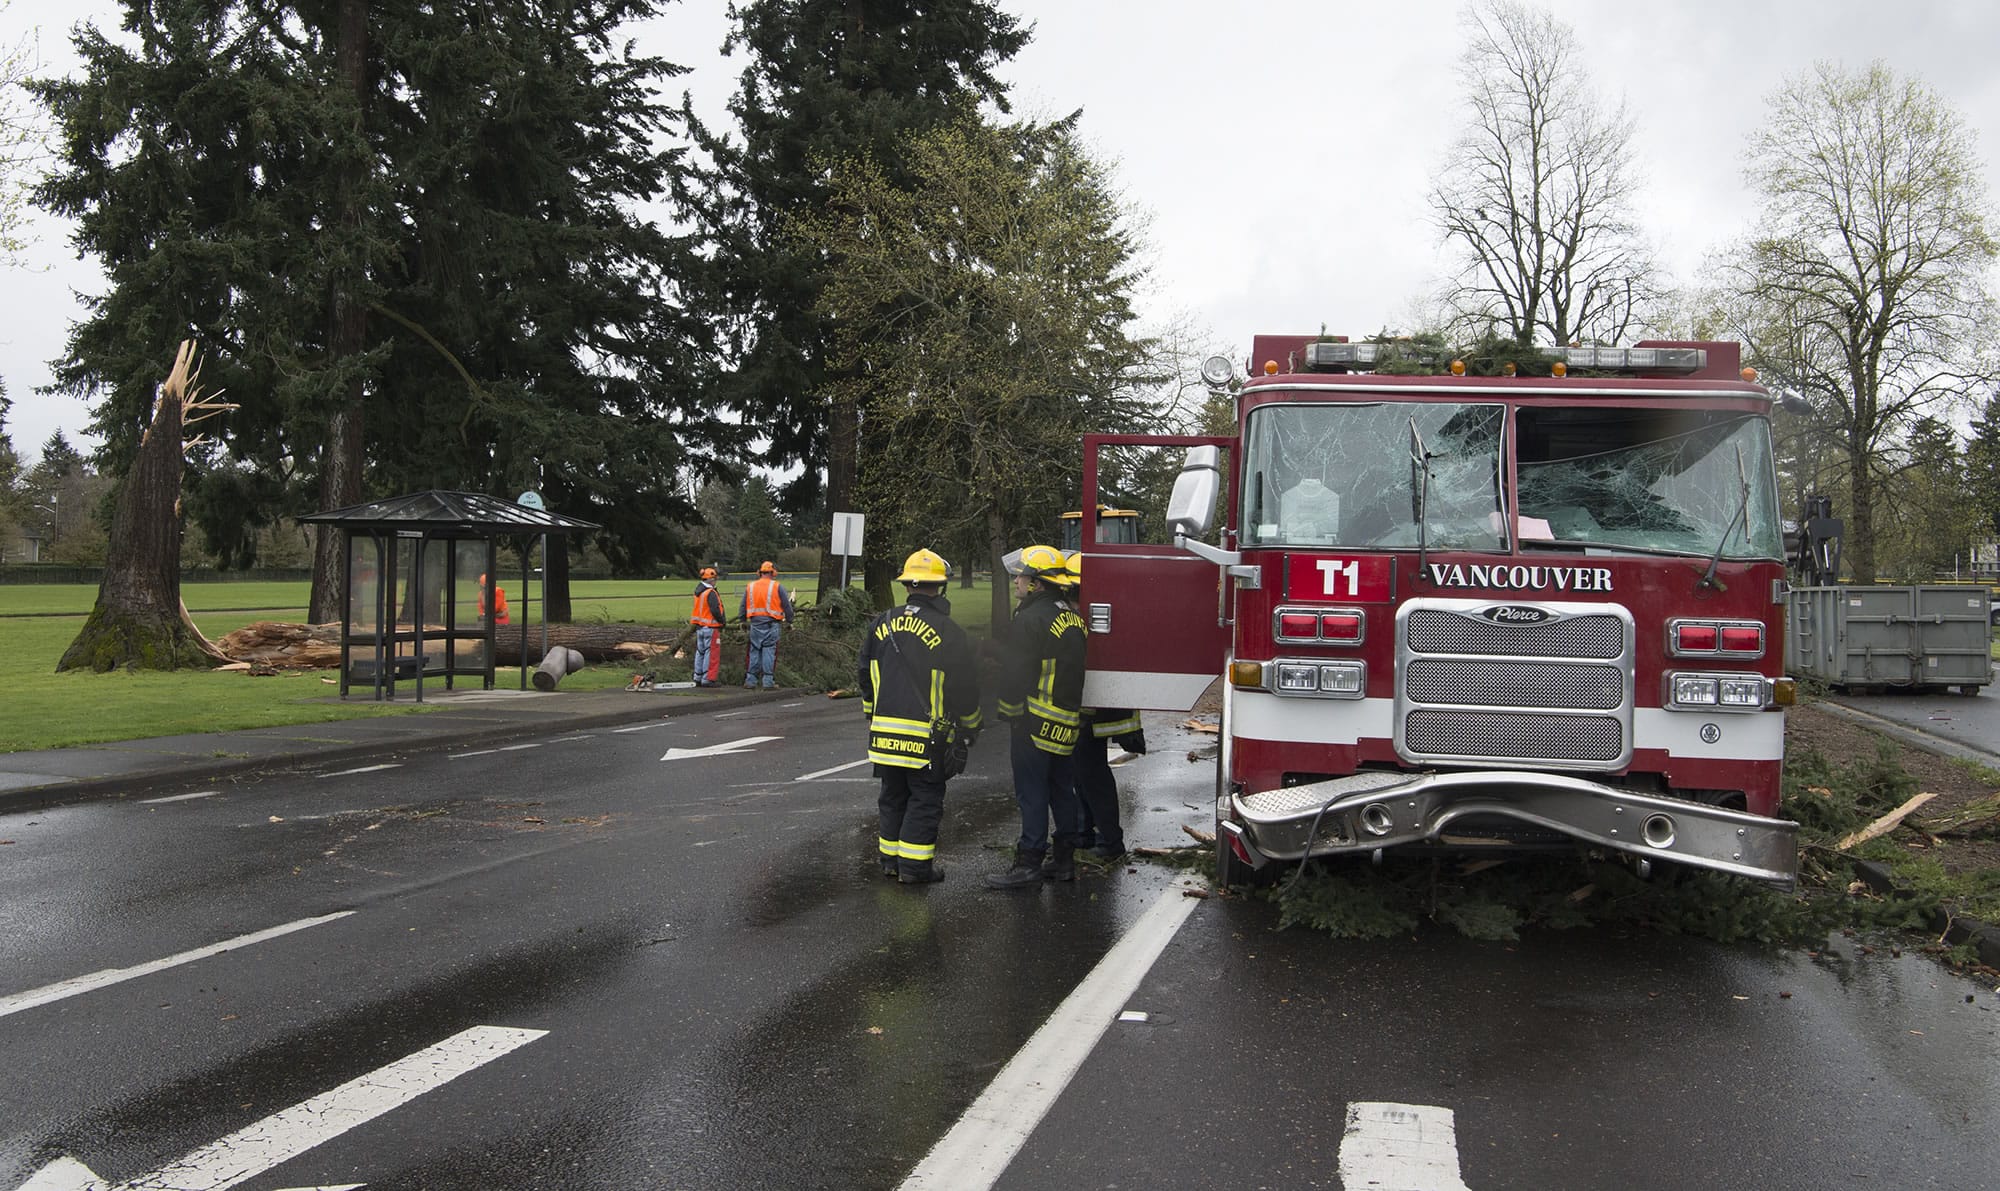 Crews work to clean up a large tree, left, after it fell on a Vancouver firetruck on East Mill Plain Boulevard following a windstorm Friday.